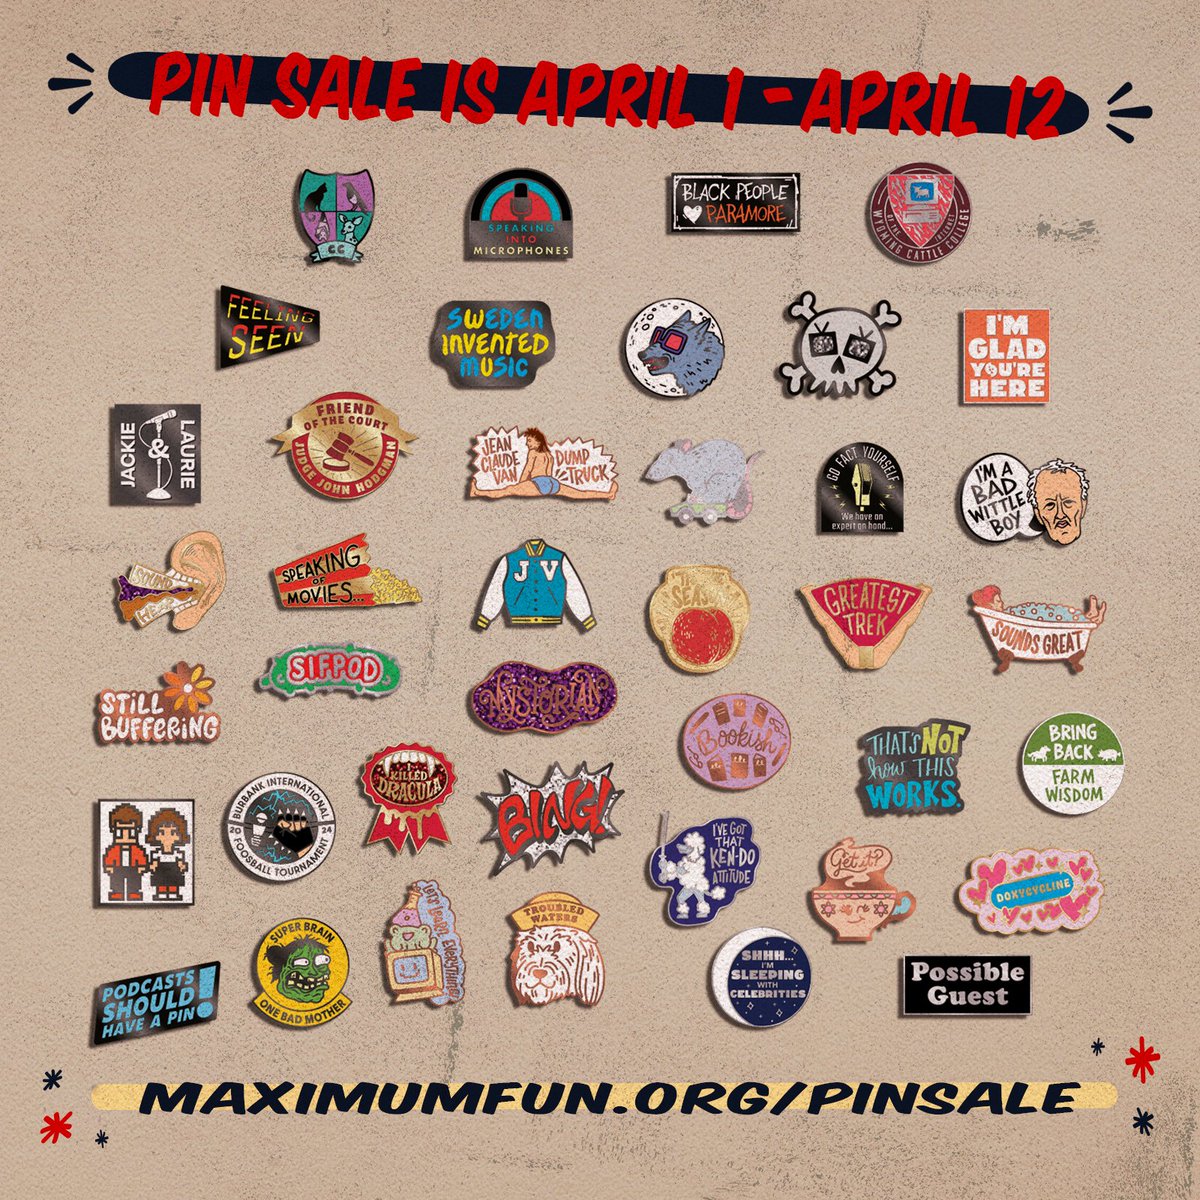 Our pin sale is going on RIGHT NOW! All $10+ members can buy any of the show pins, and all members can buy our network pin. Proceeds go to @VoteRiders! Get your pins here: maximumfun.org/pinsale